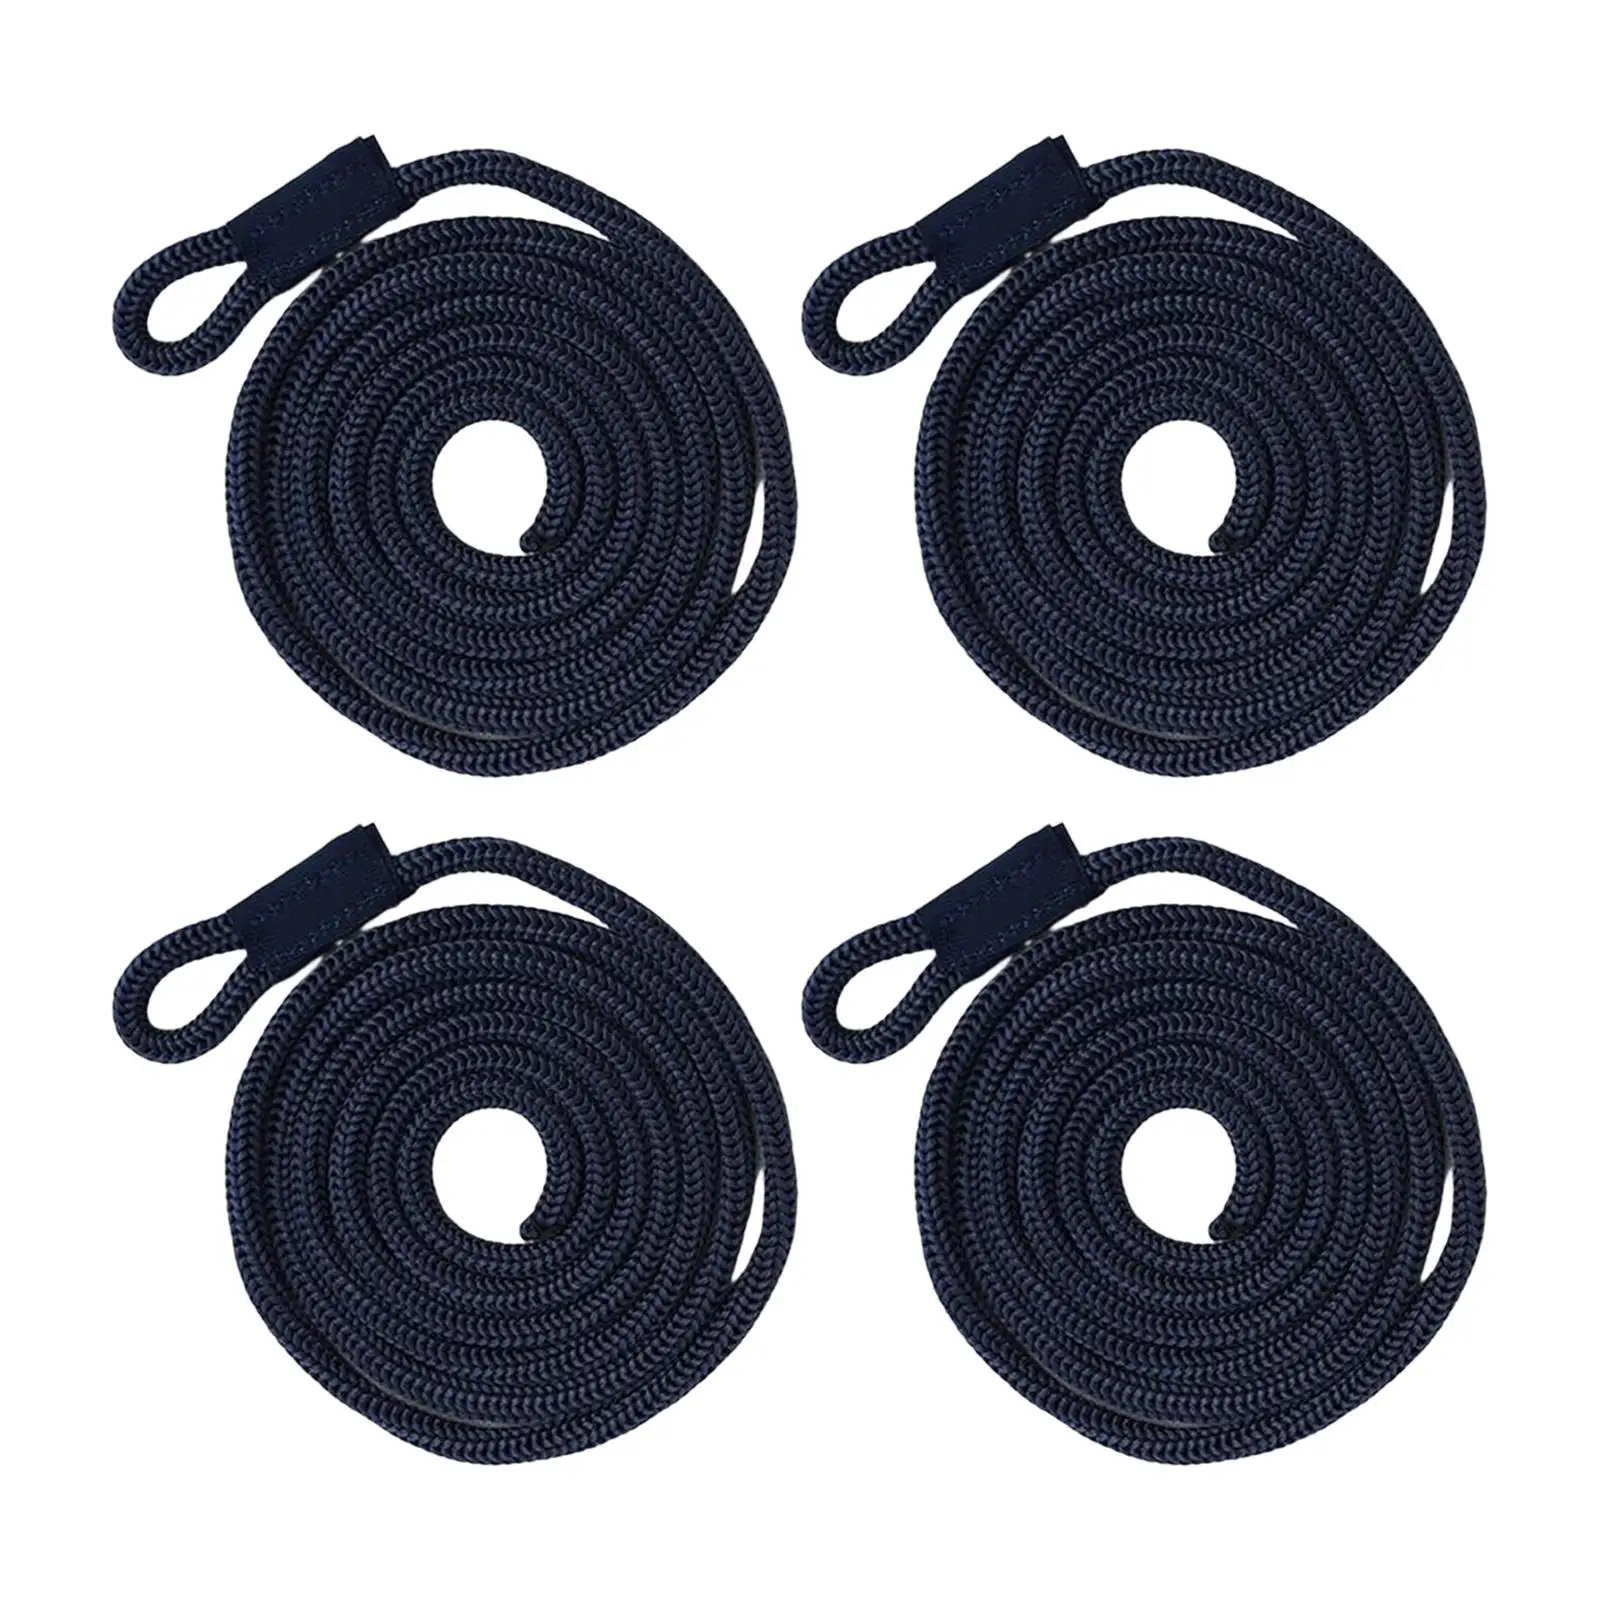 2x 4Pcs Boat Lines, Boat Fenders Bumpers, Inflatable Marine Bumpers Mooring Rope Bumpers Lines